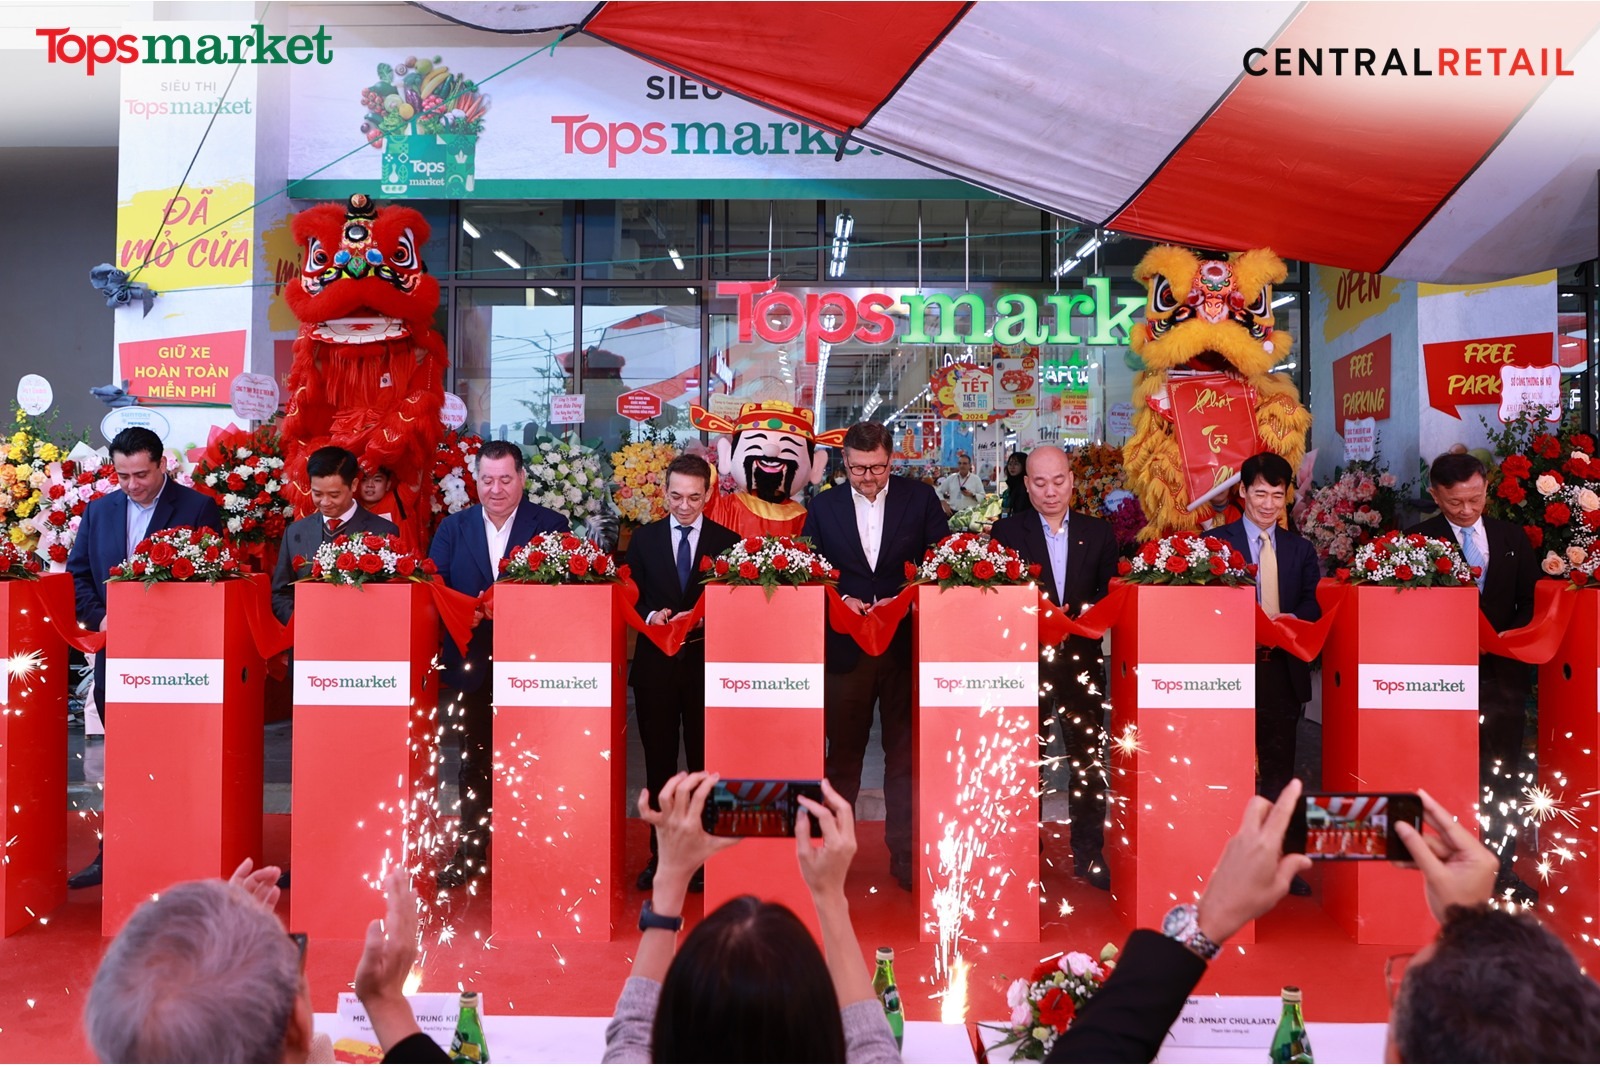 Central Retail organizes the opening ceremony event of the 9th Tops Market in Vietnam